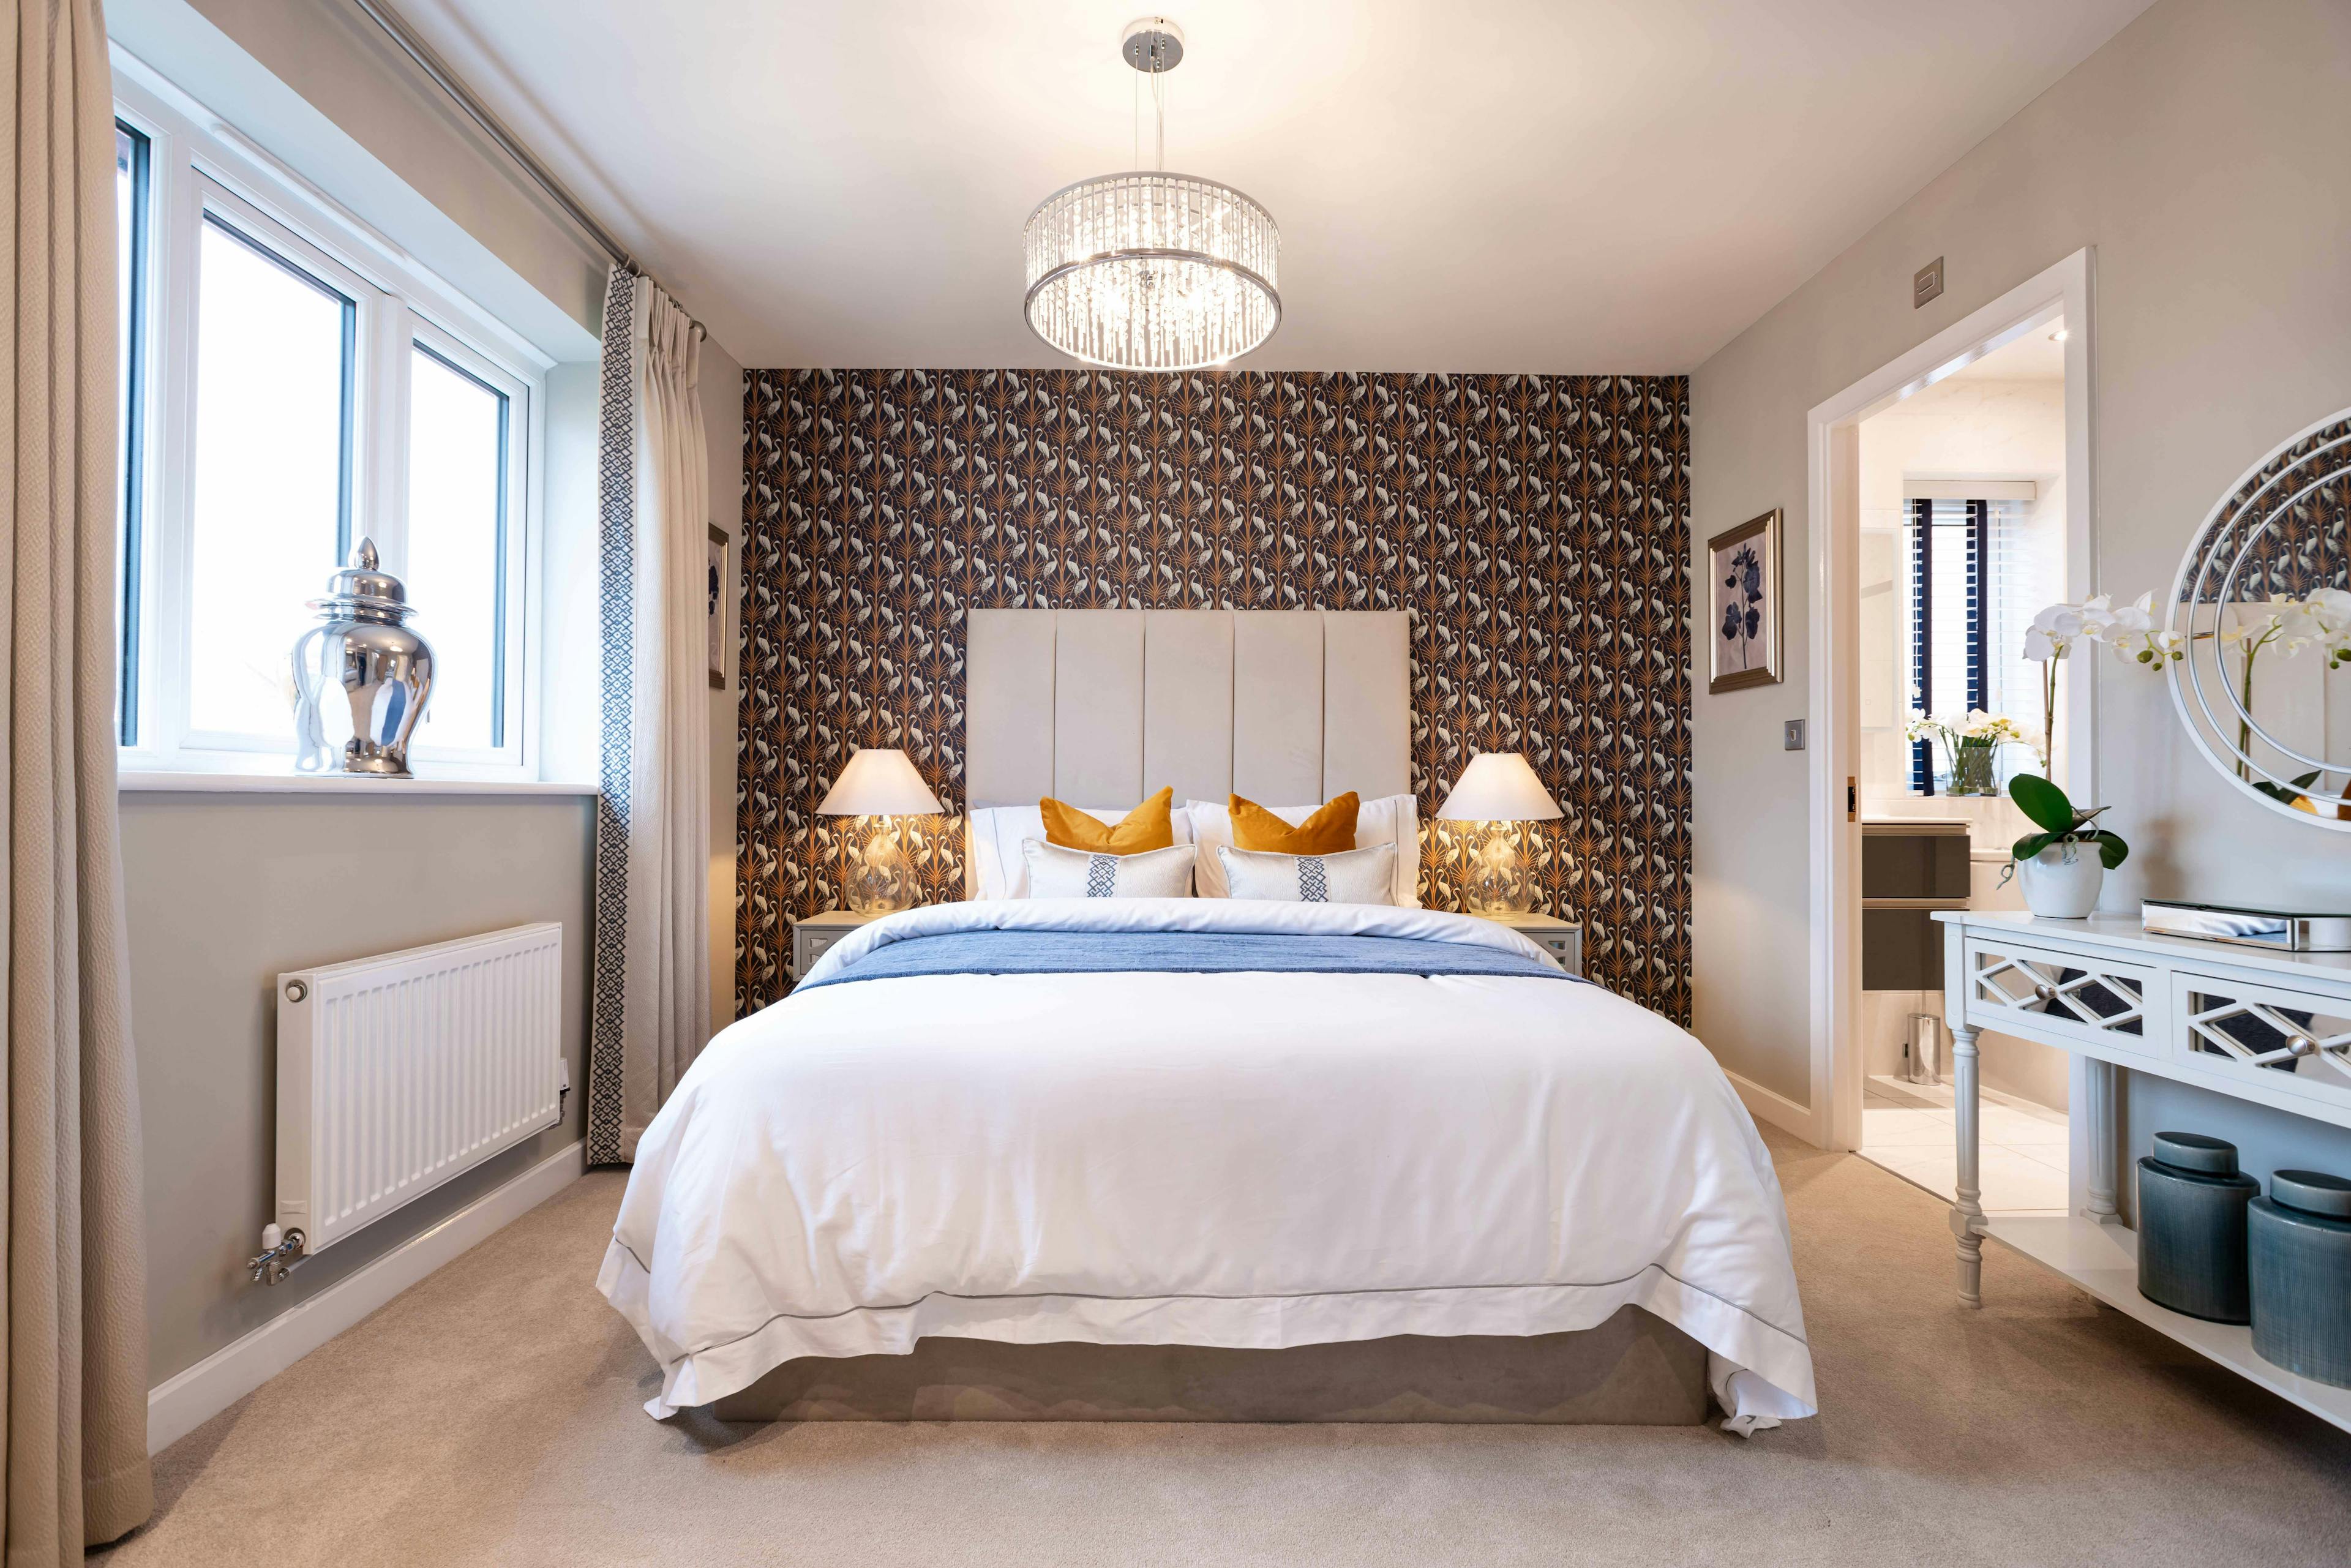 Bloor Showhome showing how cozy a bedroom can be